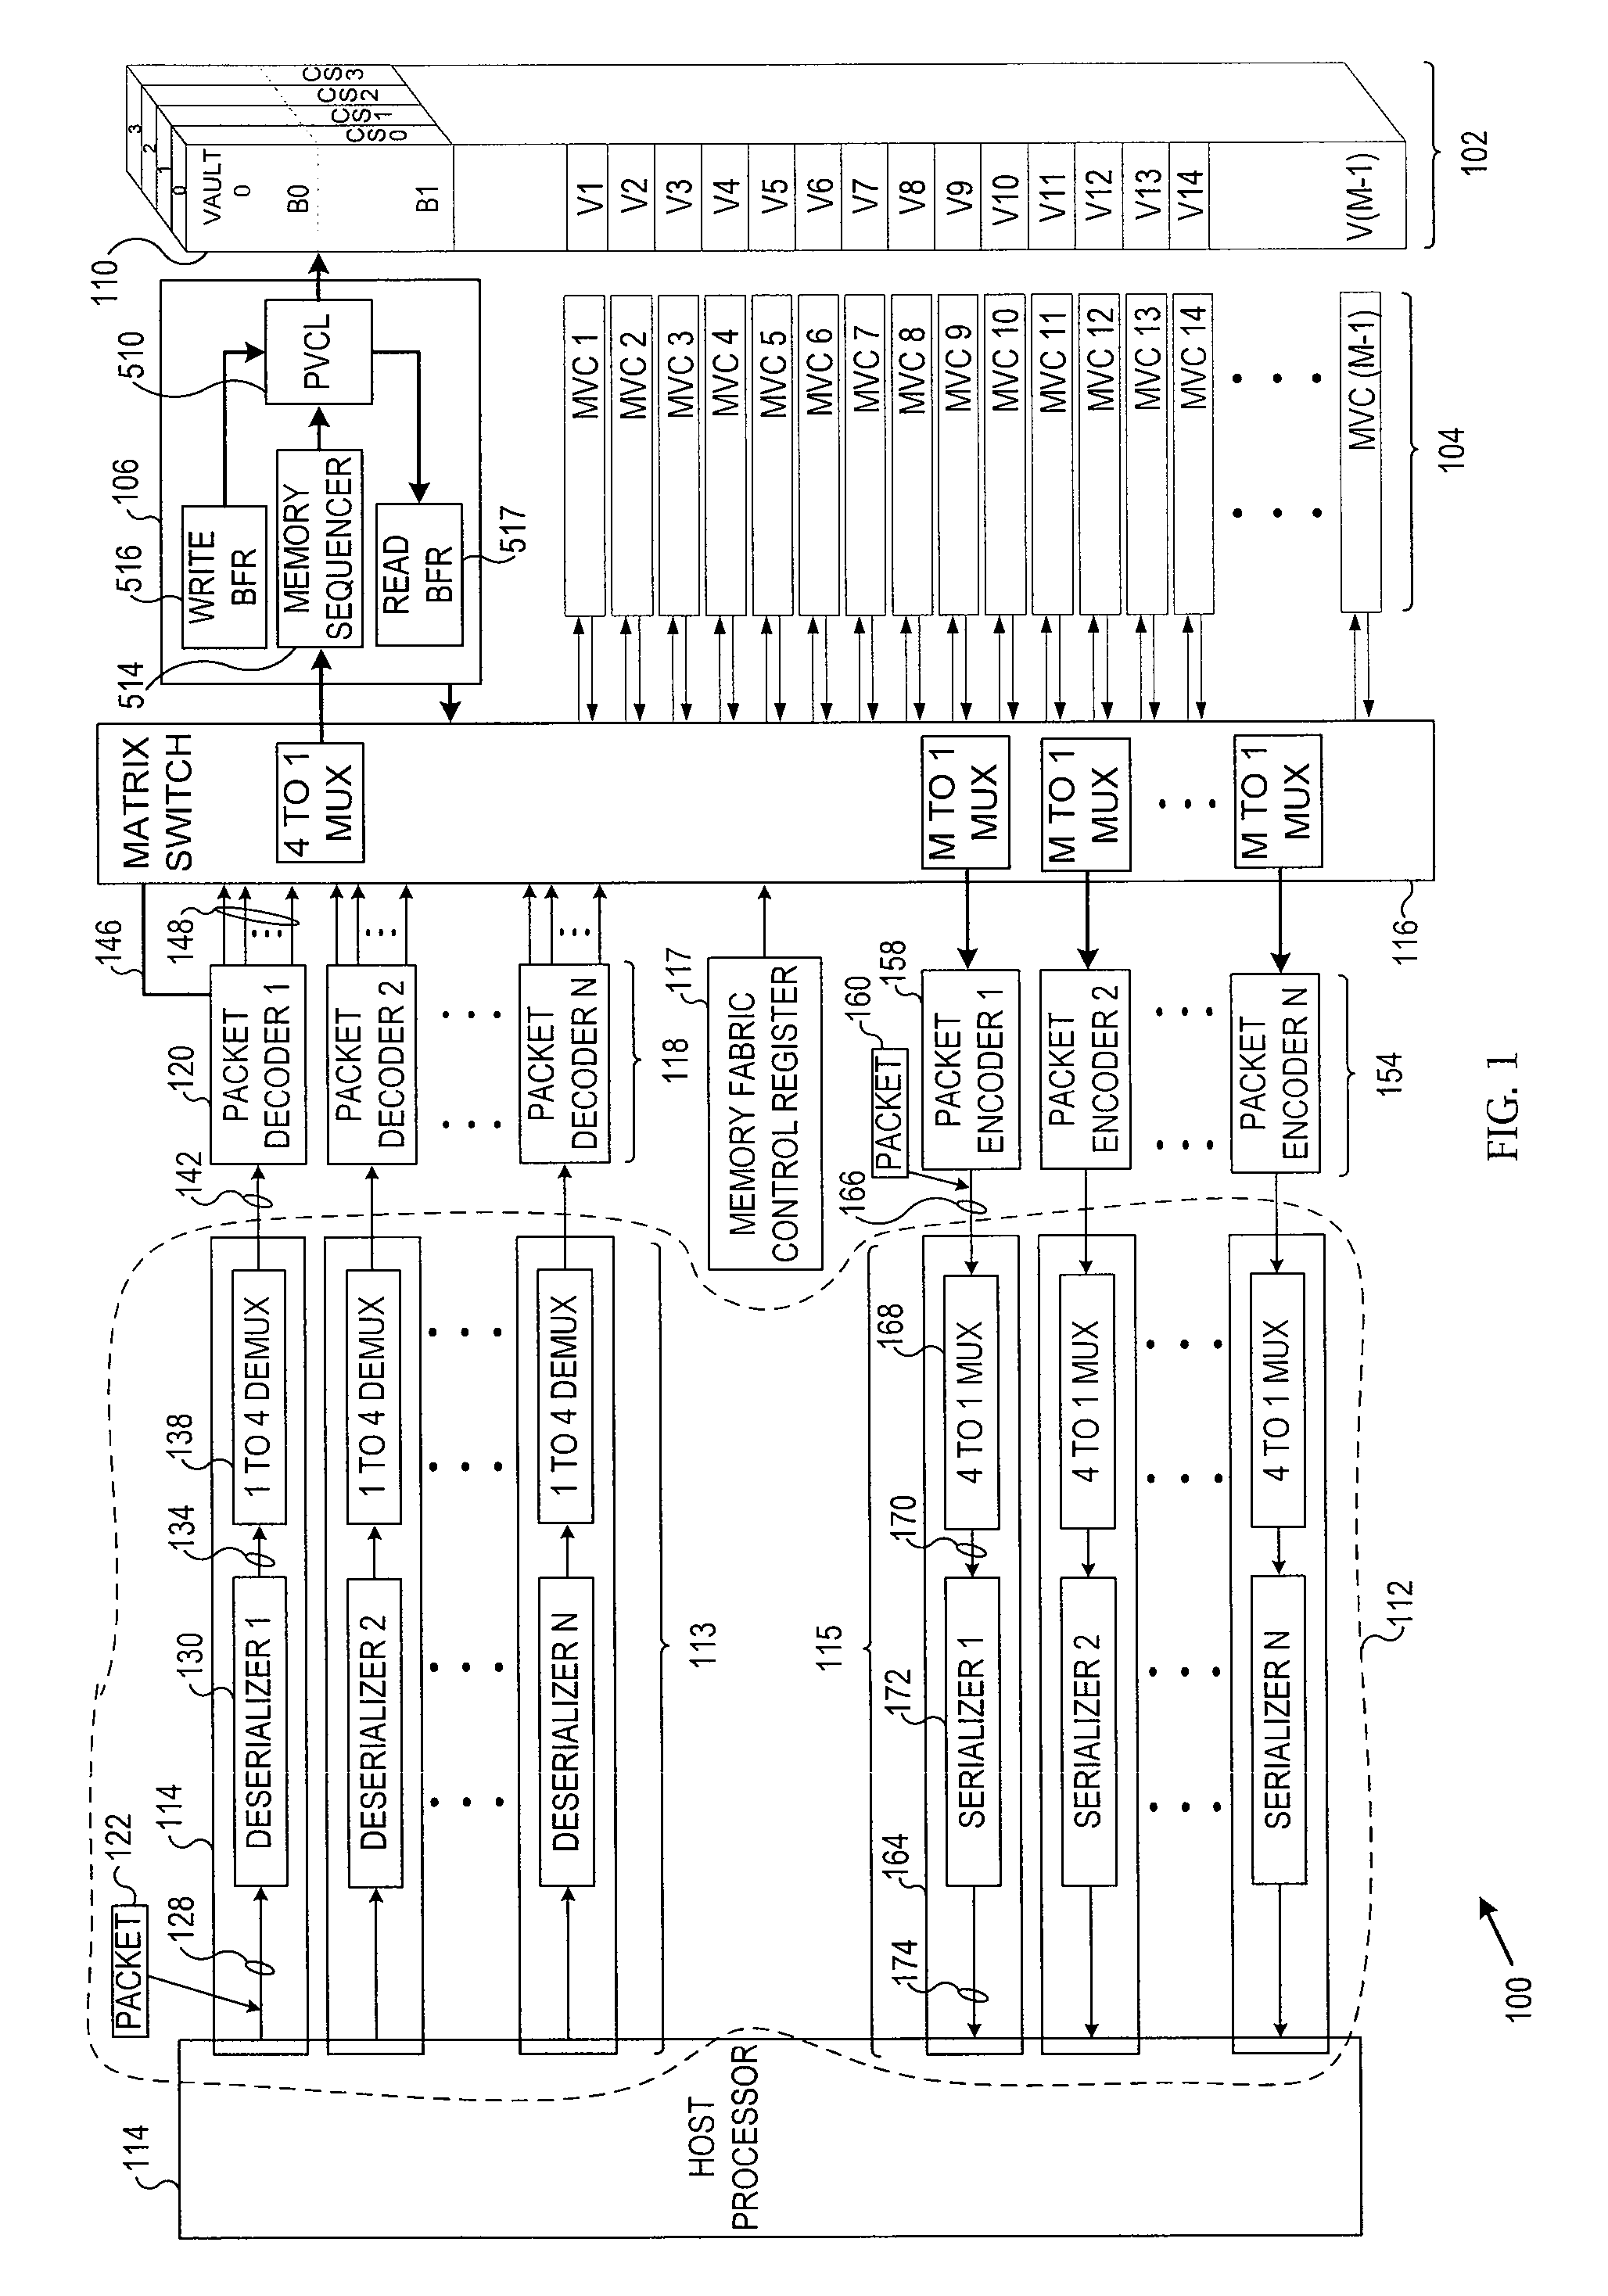 Switched interface stacked-die memory architecture